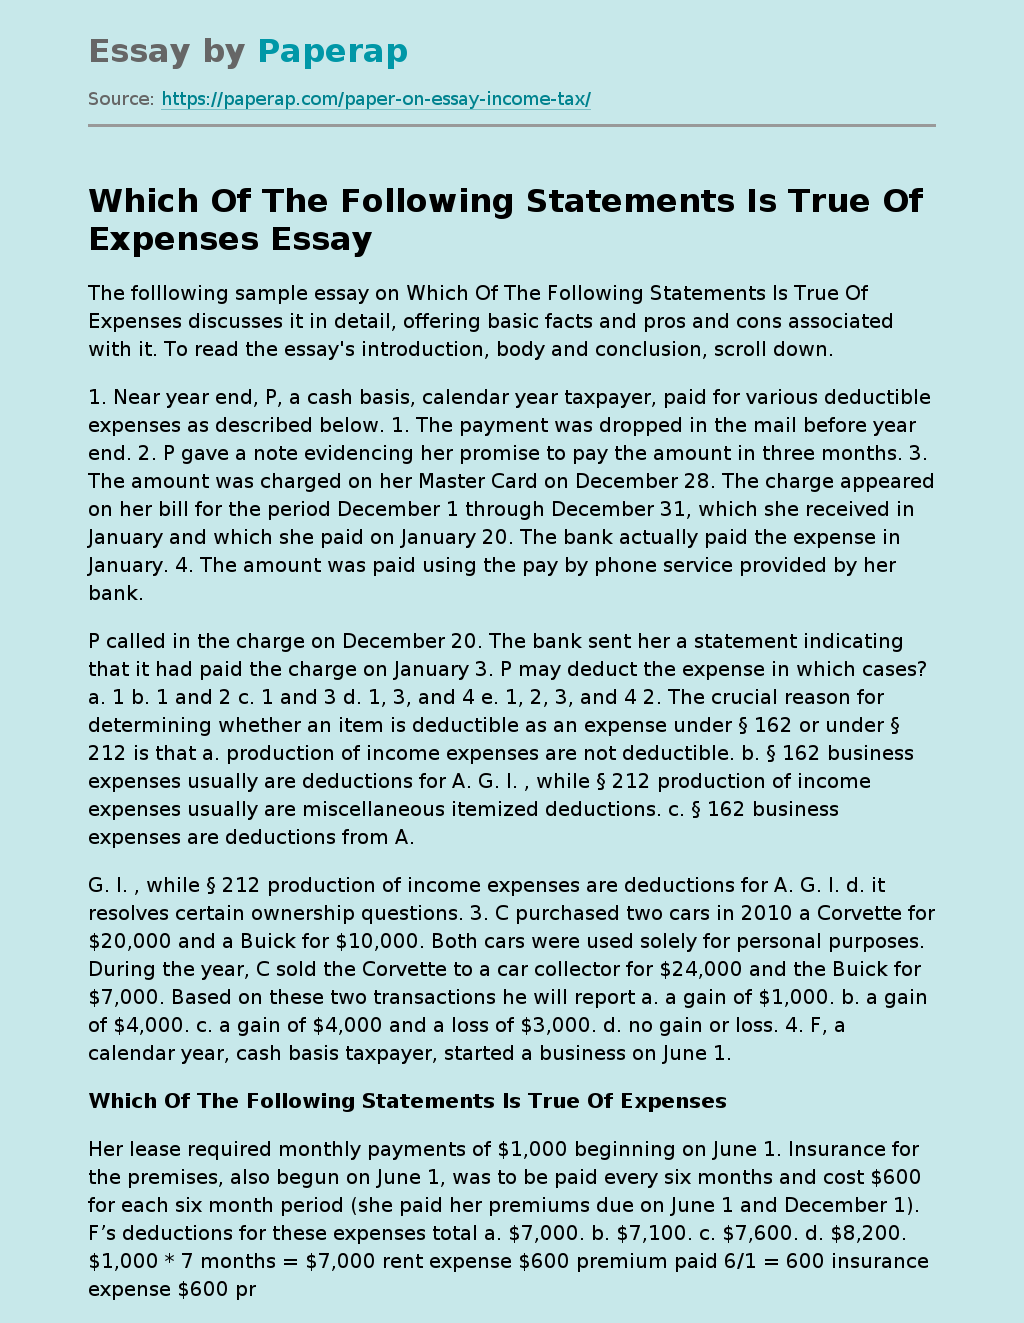 Which Of The Following Statements Is True Of Expenses